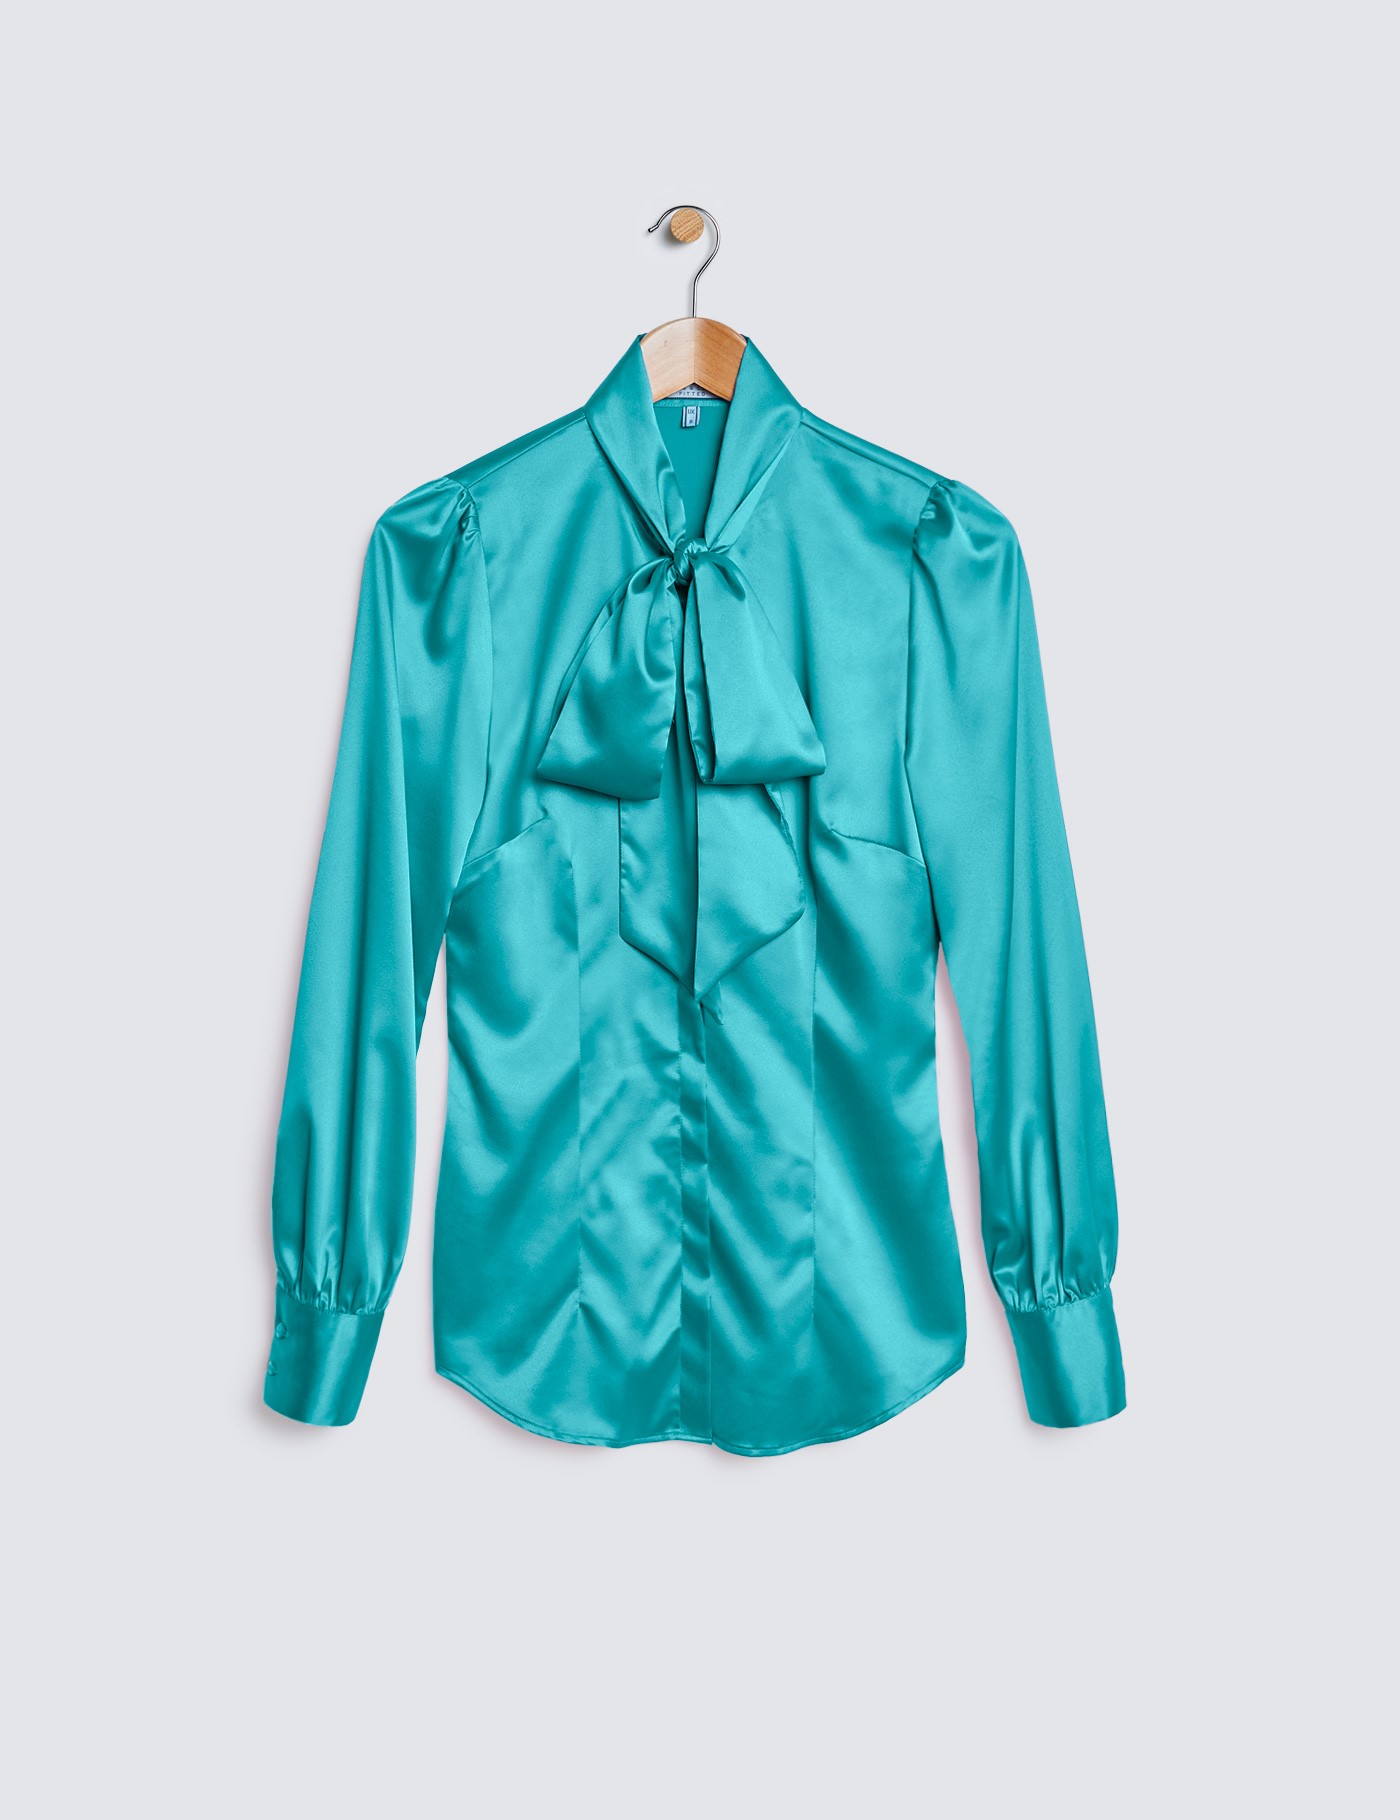 Women S Aqua Fitted Luxury Satin Blouse Pussy Bow Hawes And Curtis